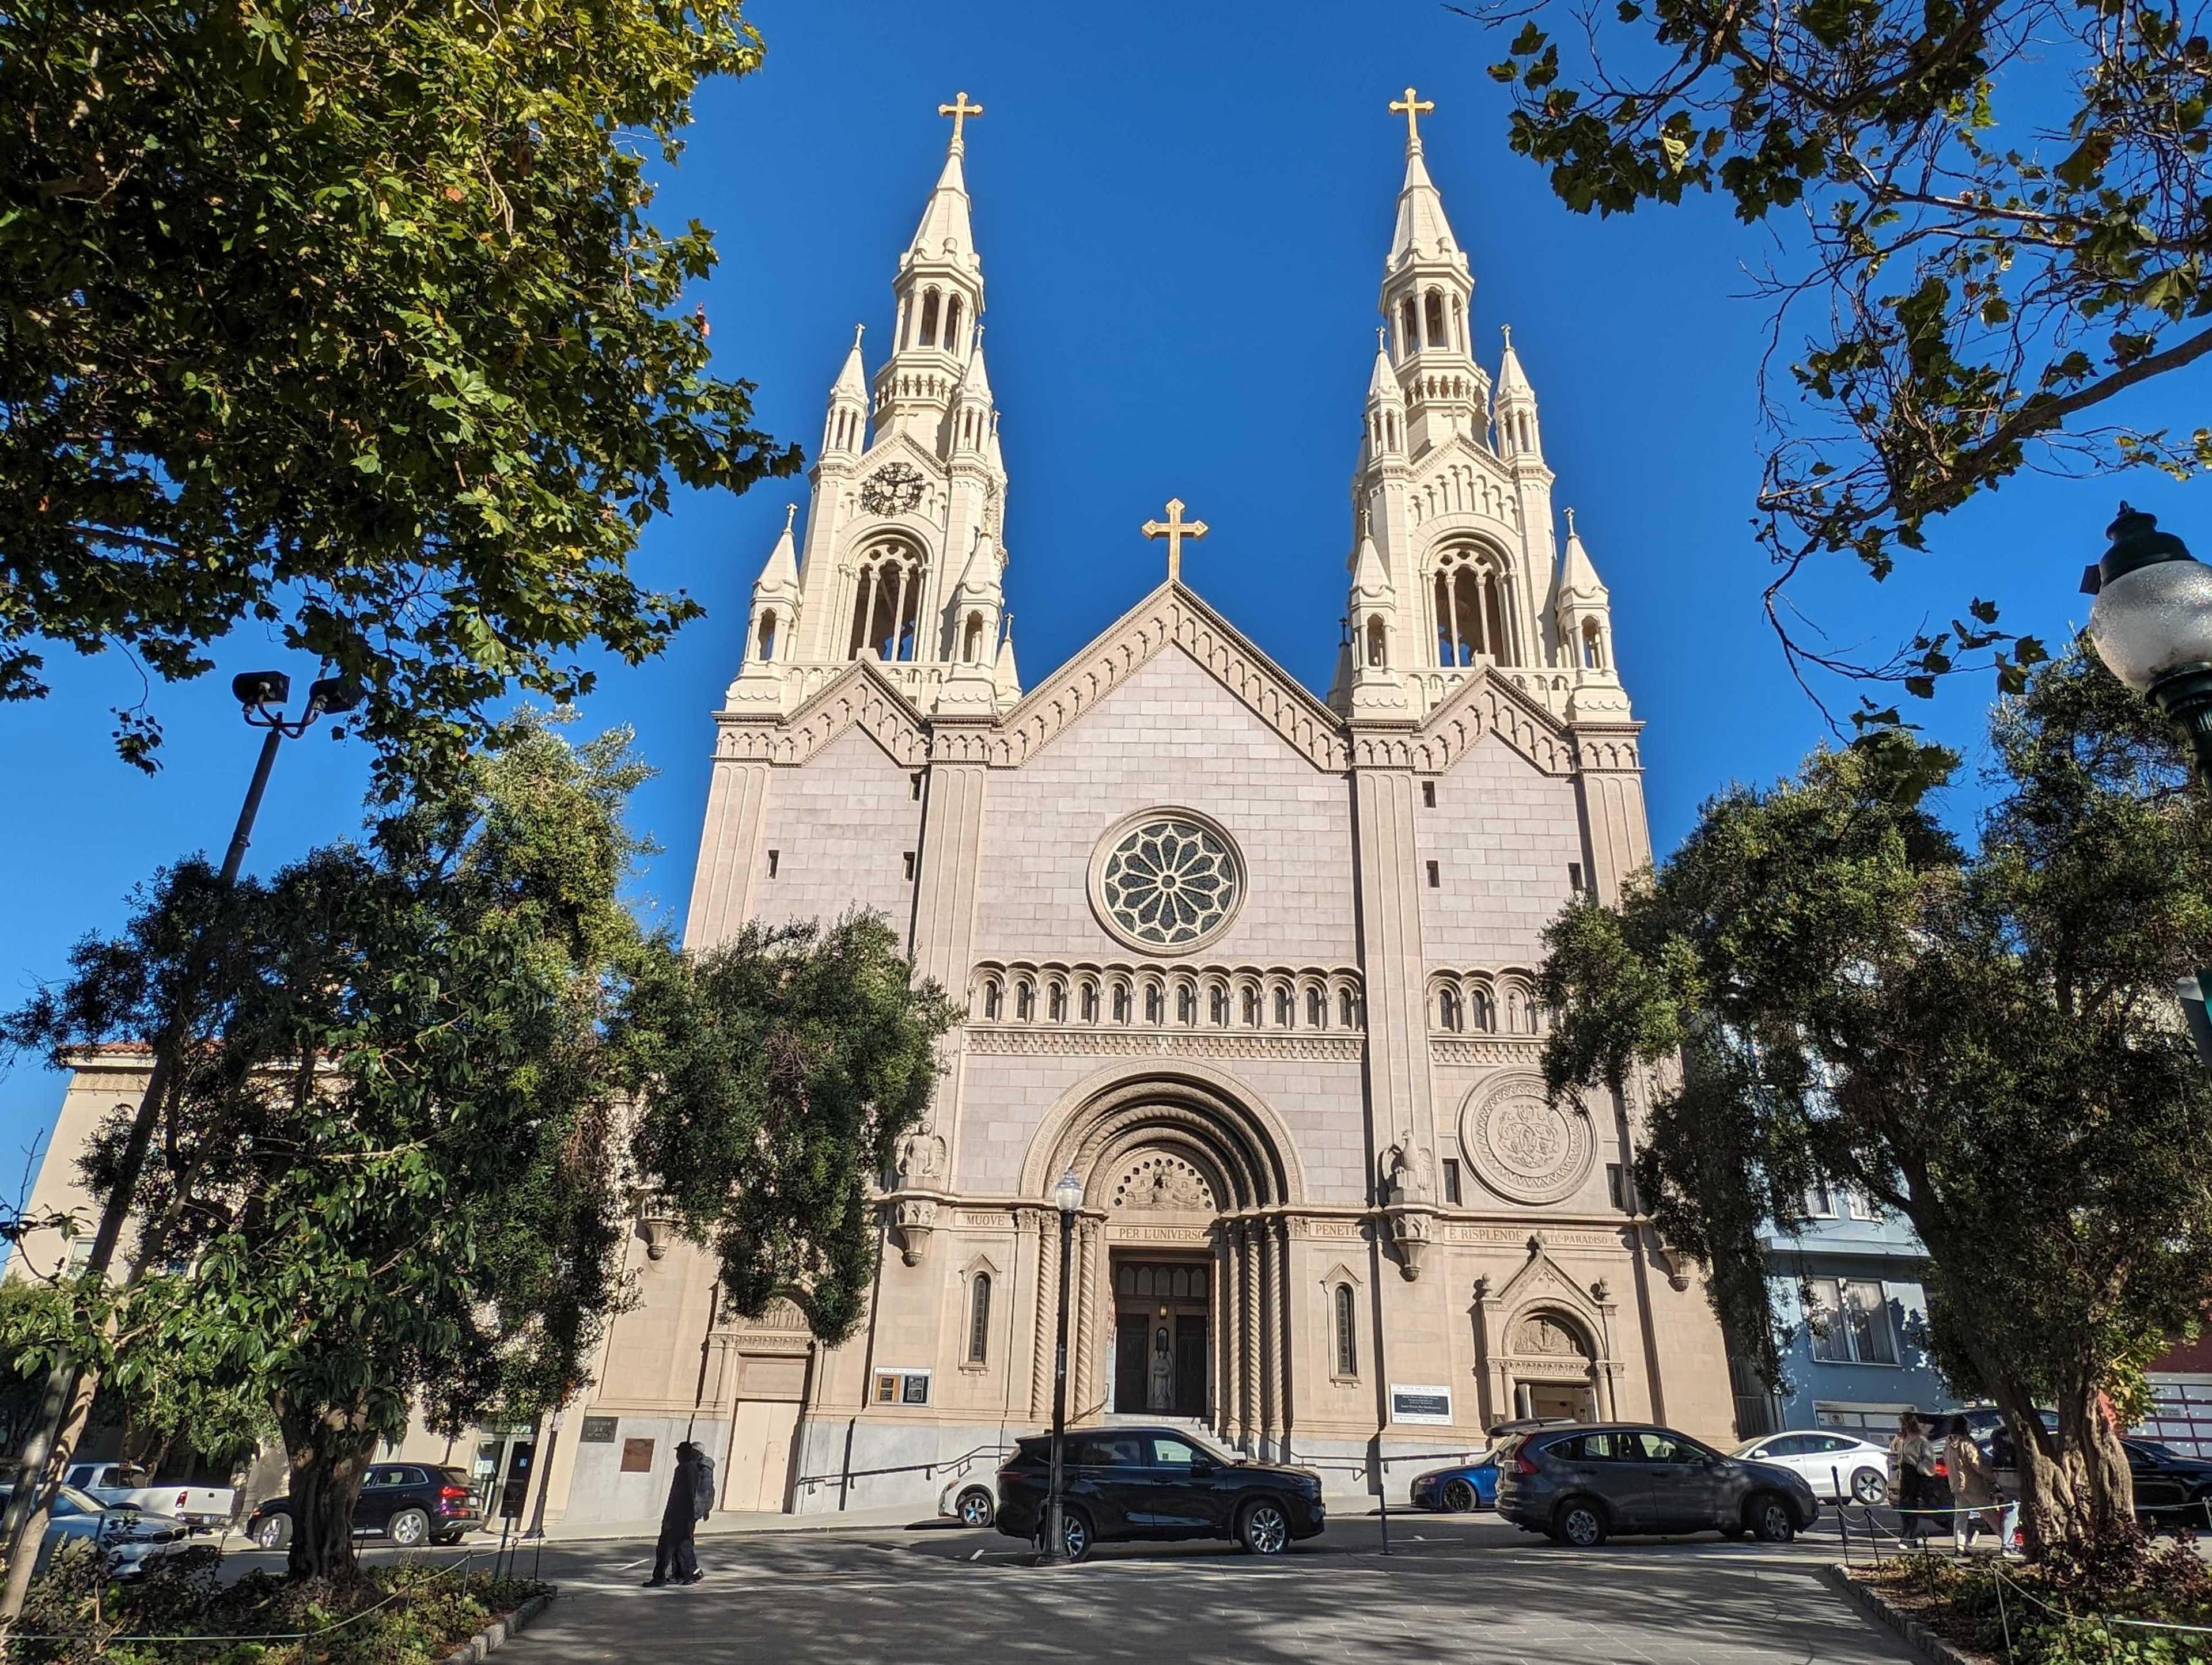 A Catholic church stands above a quiet city street on a sunny day.